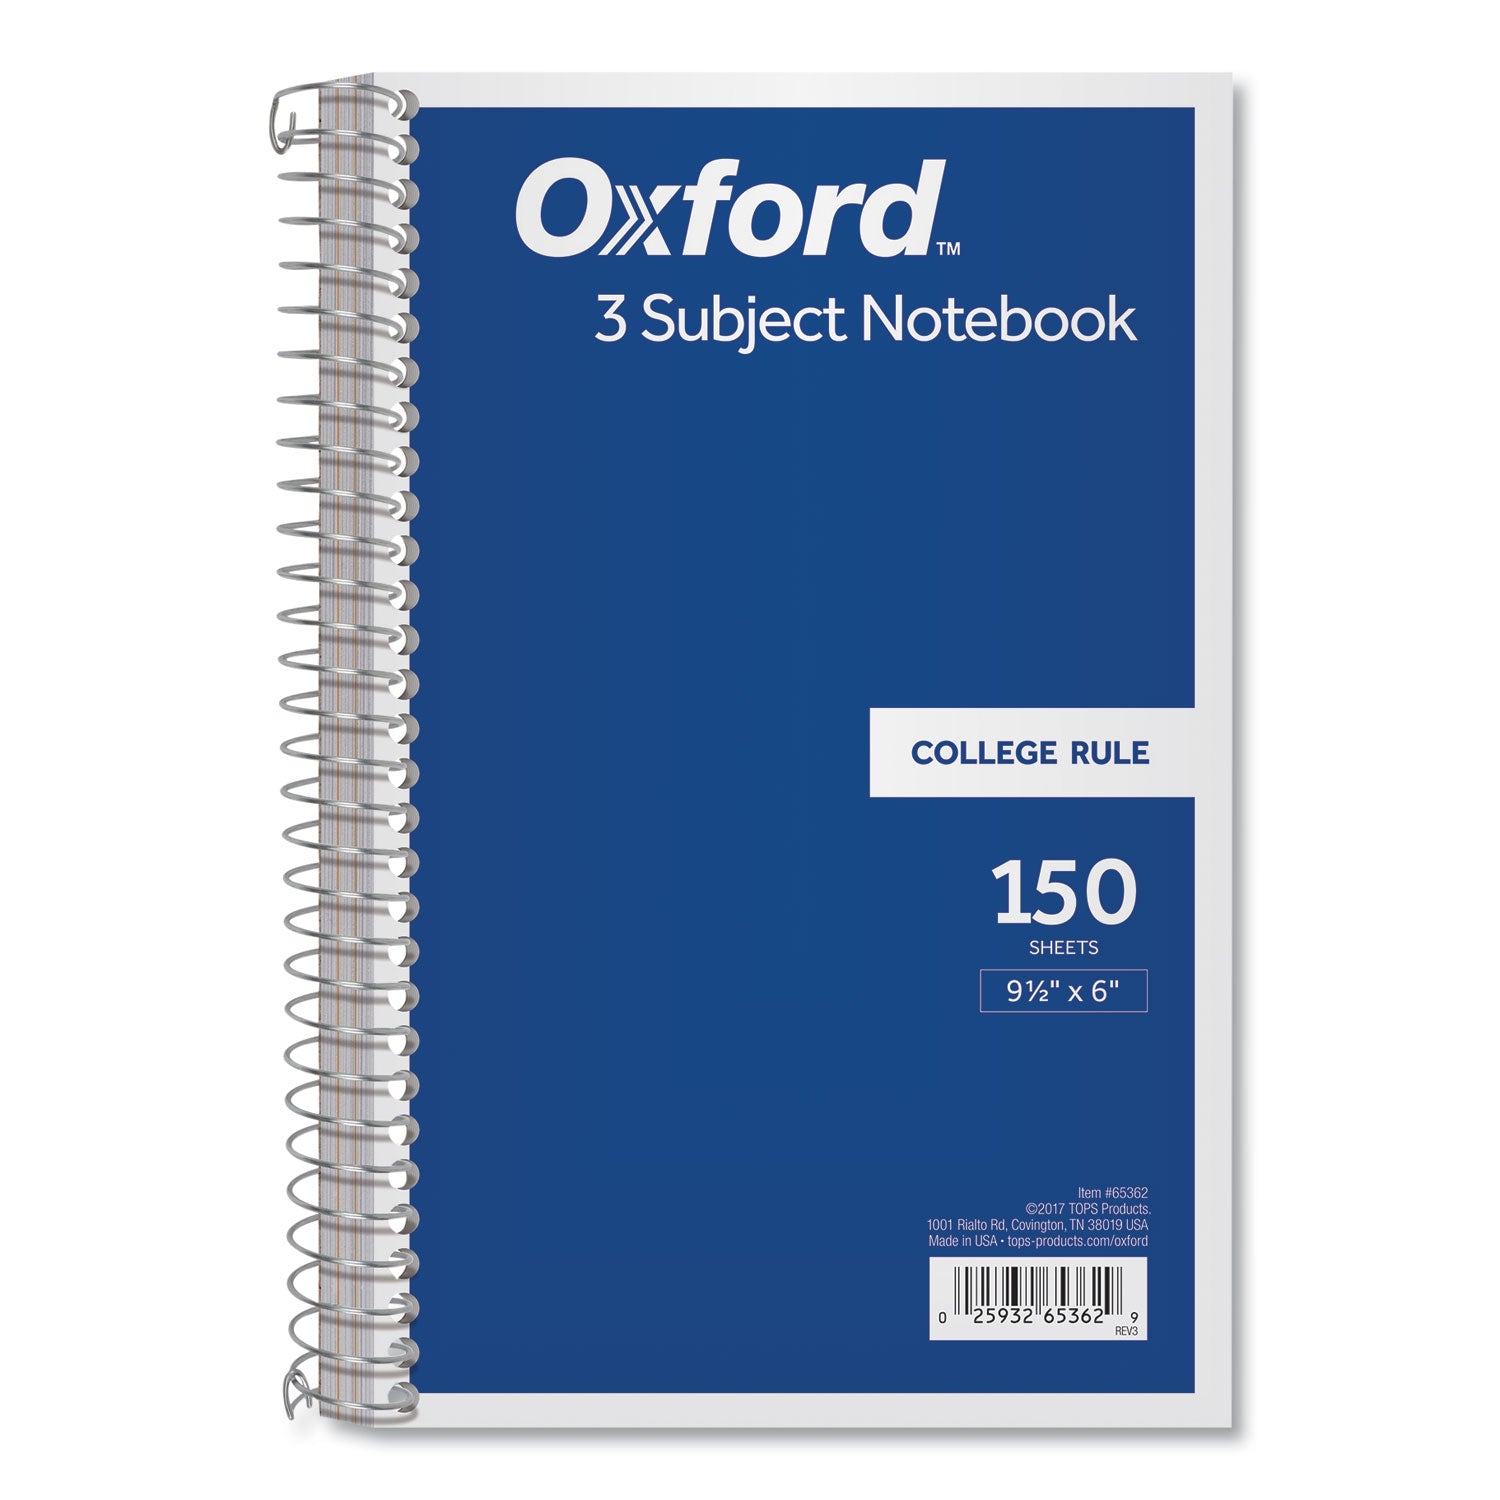 Coil-Lock Wirebound Notebooks, 3-Subject, Medium/College Rule, Randomly Assorted Cover Color, (150) 9.5 x 6 Sheets - 